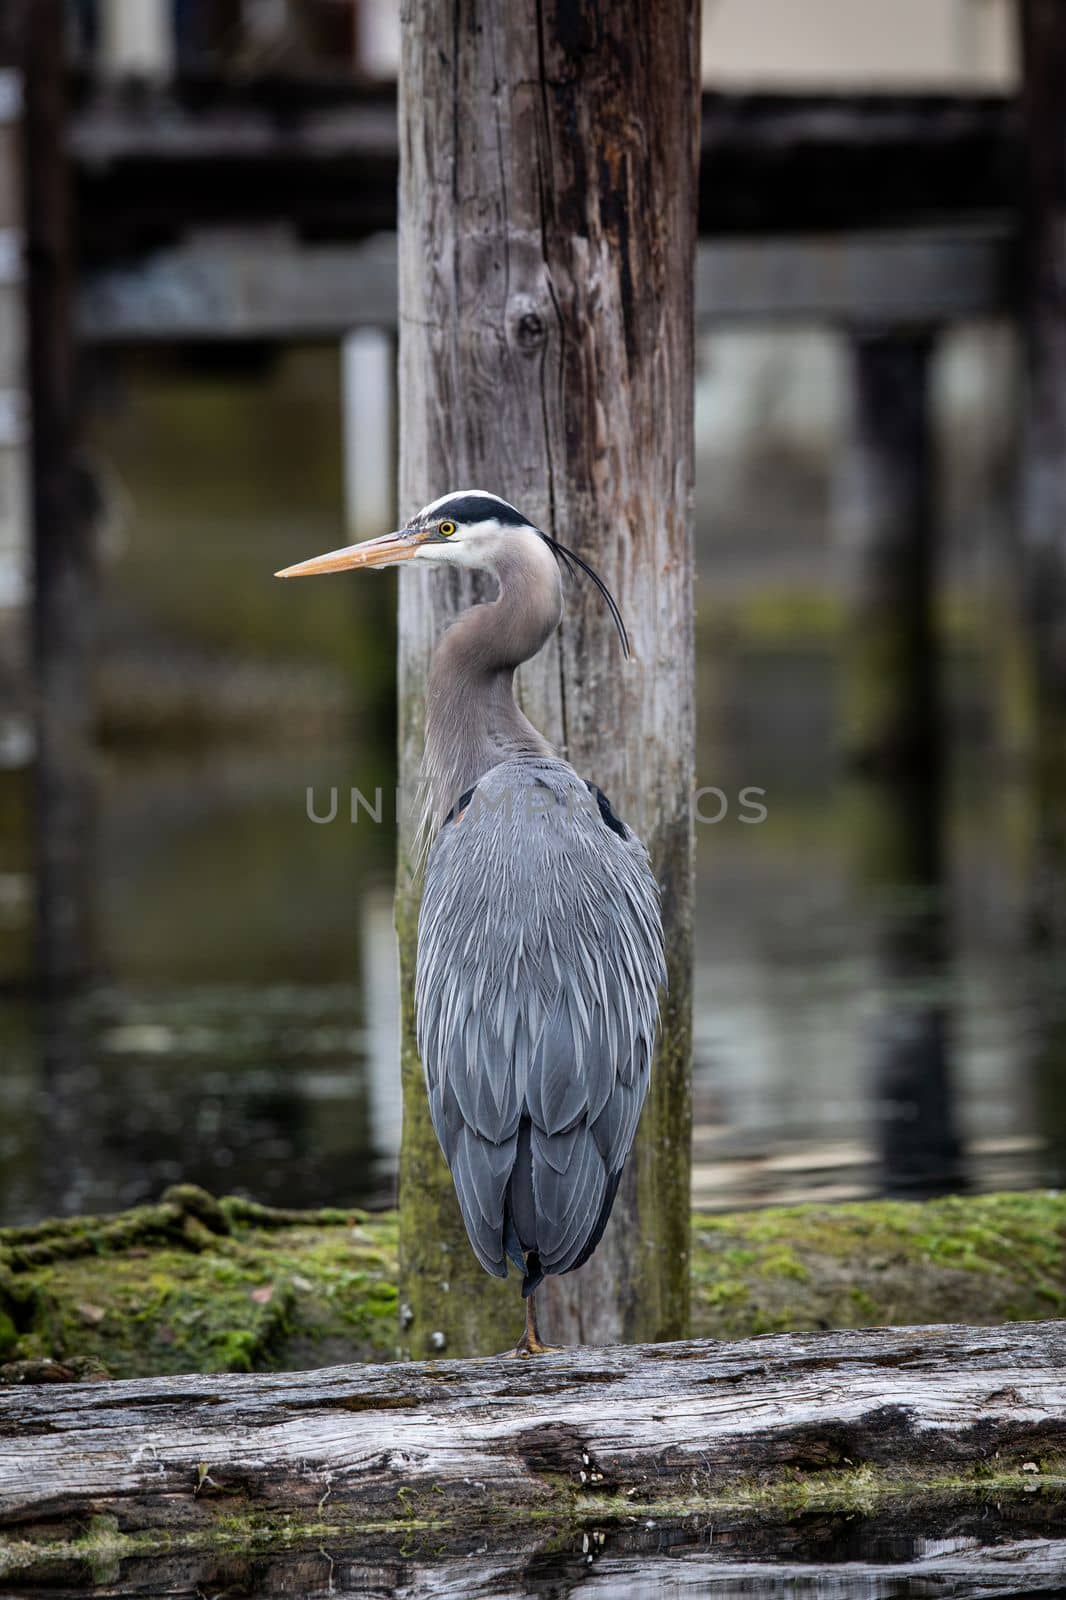 A Great Blue Heron standing on a log while looking around by Granchinho